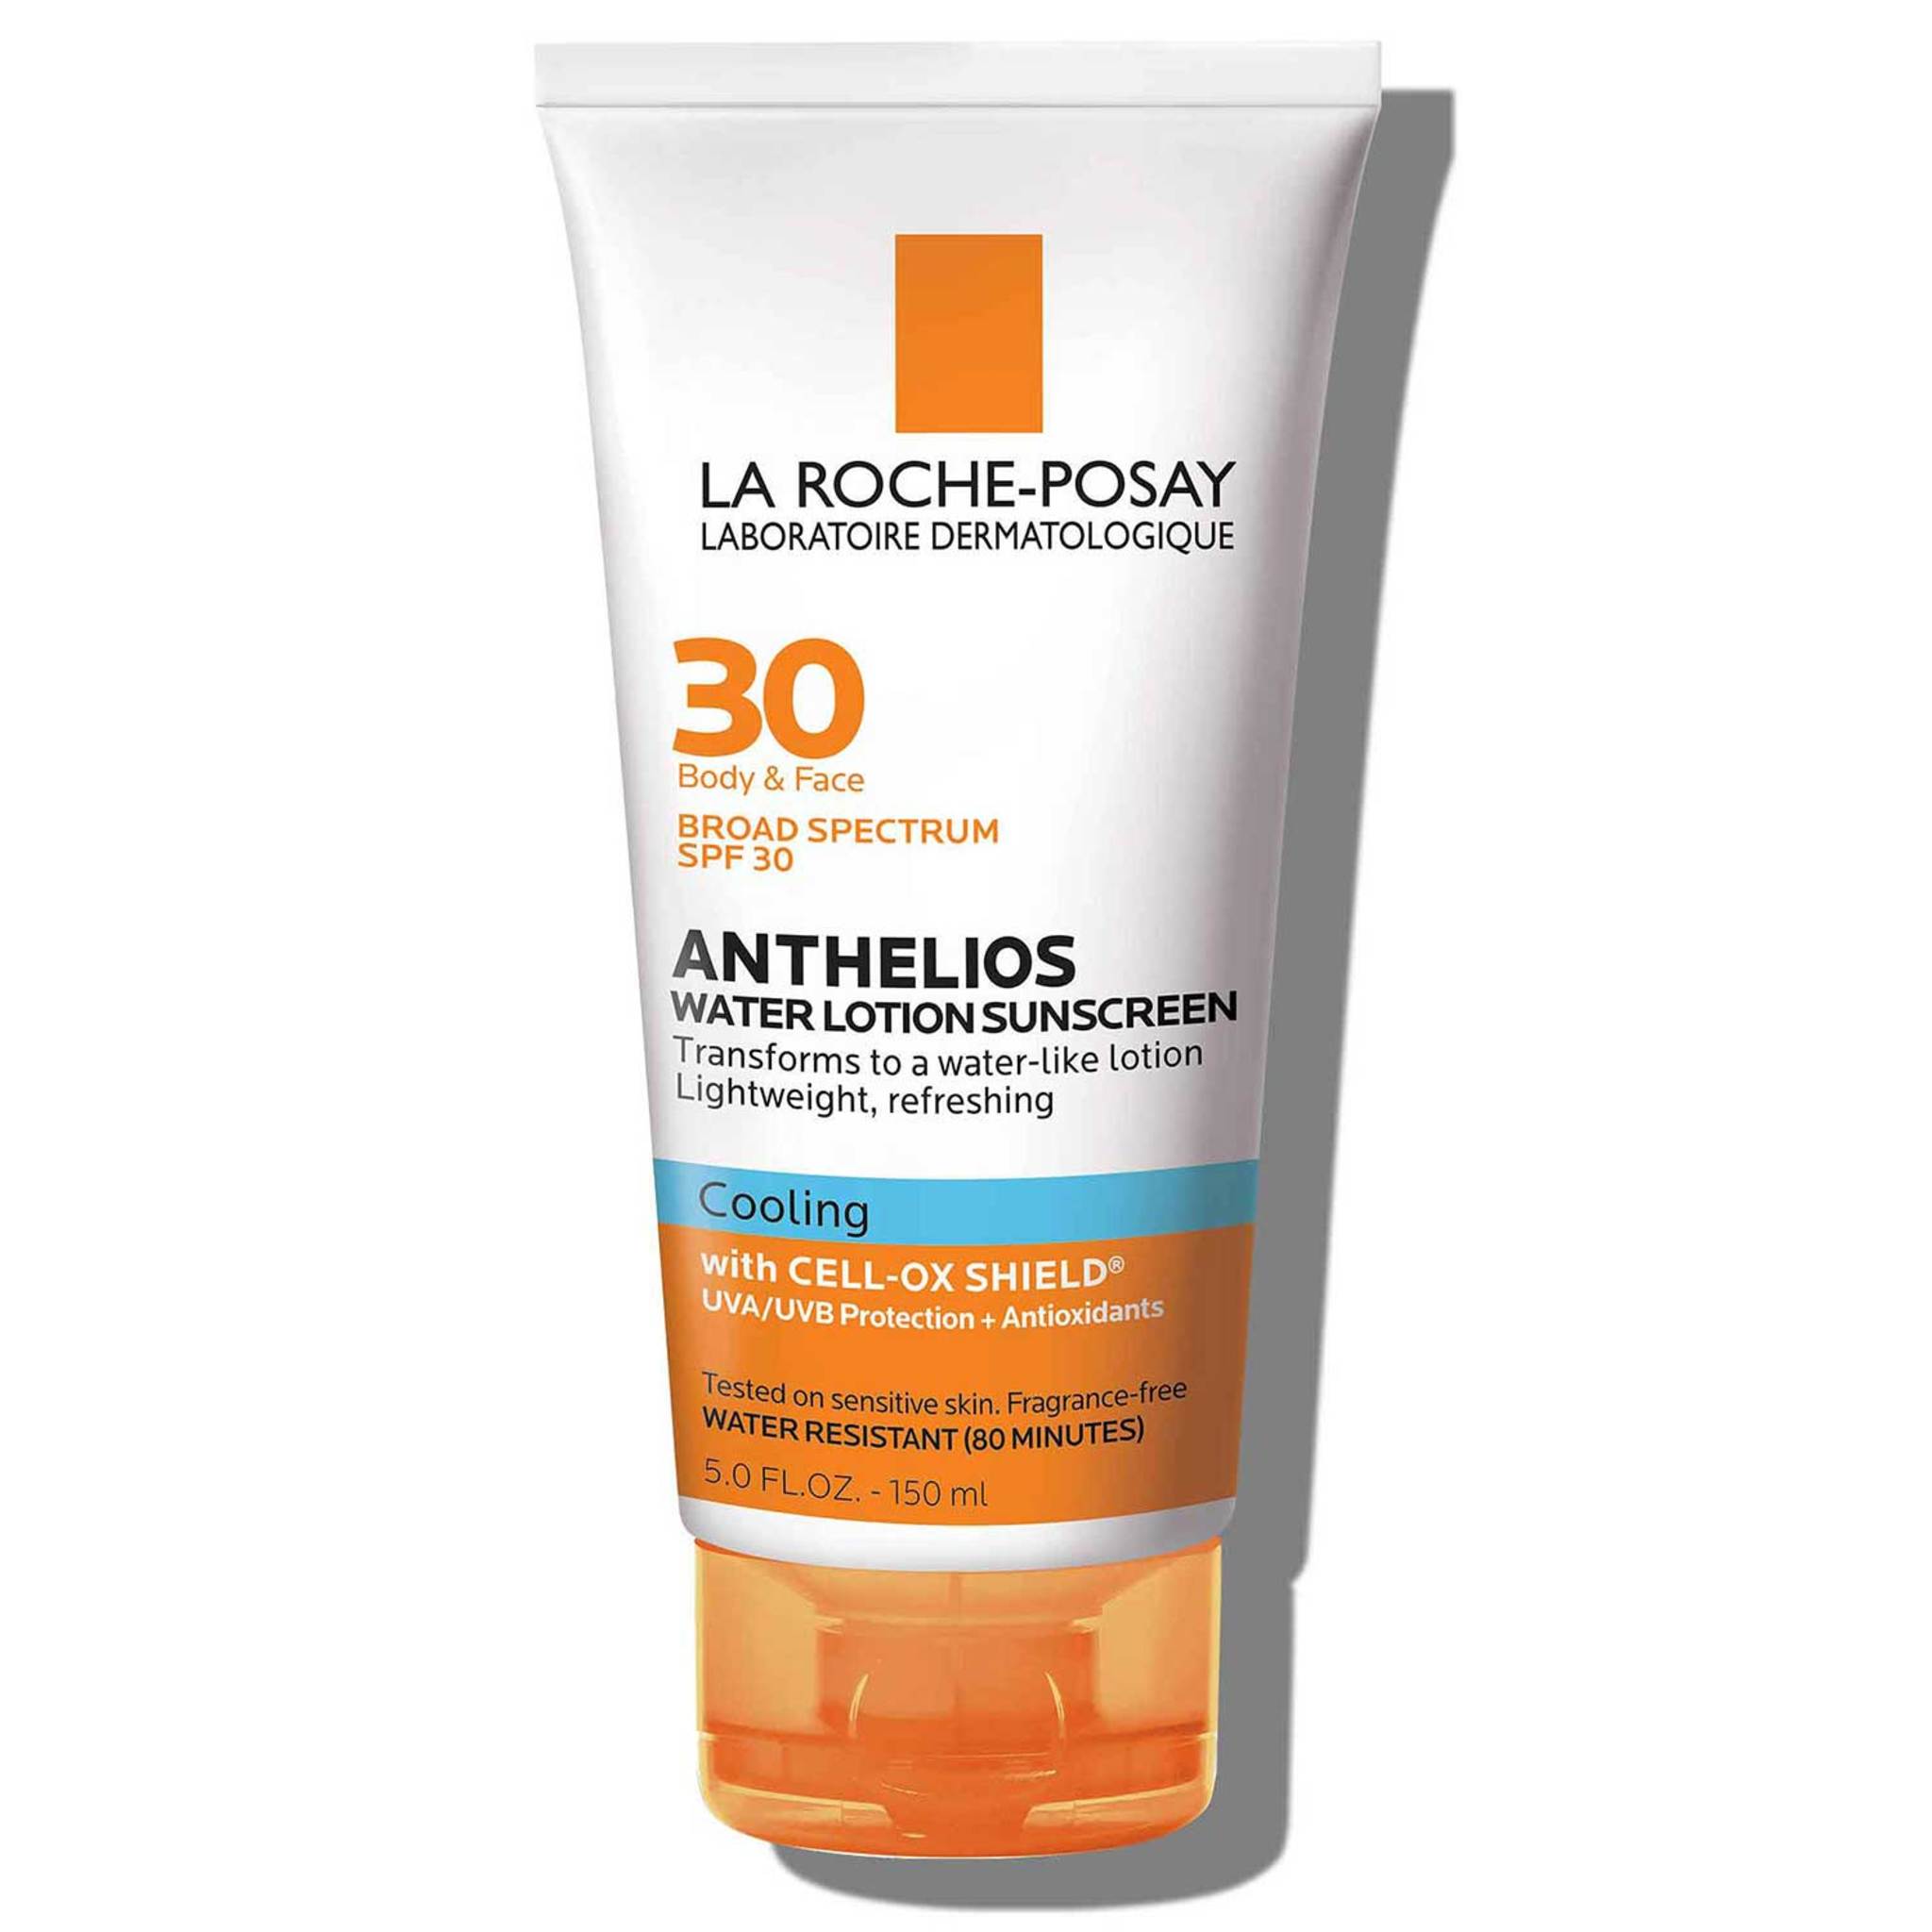 La Roche-Posay Anthelios Cooling Water Lotion Sunscreen SPF 30 main image.